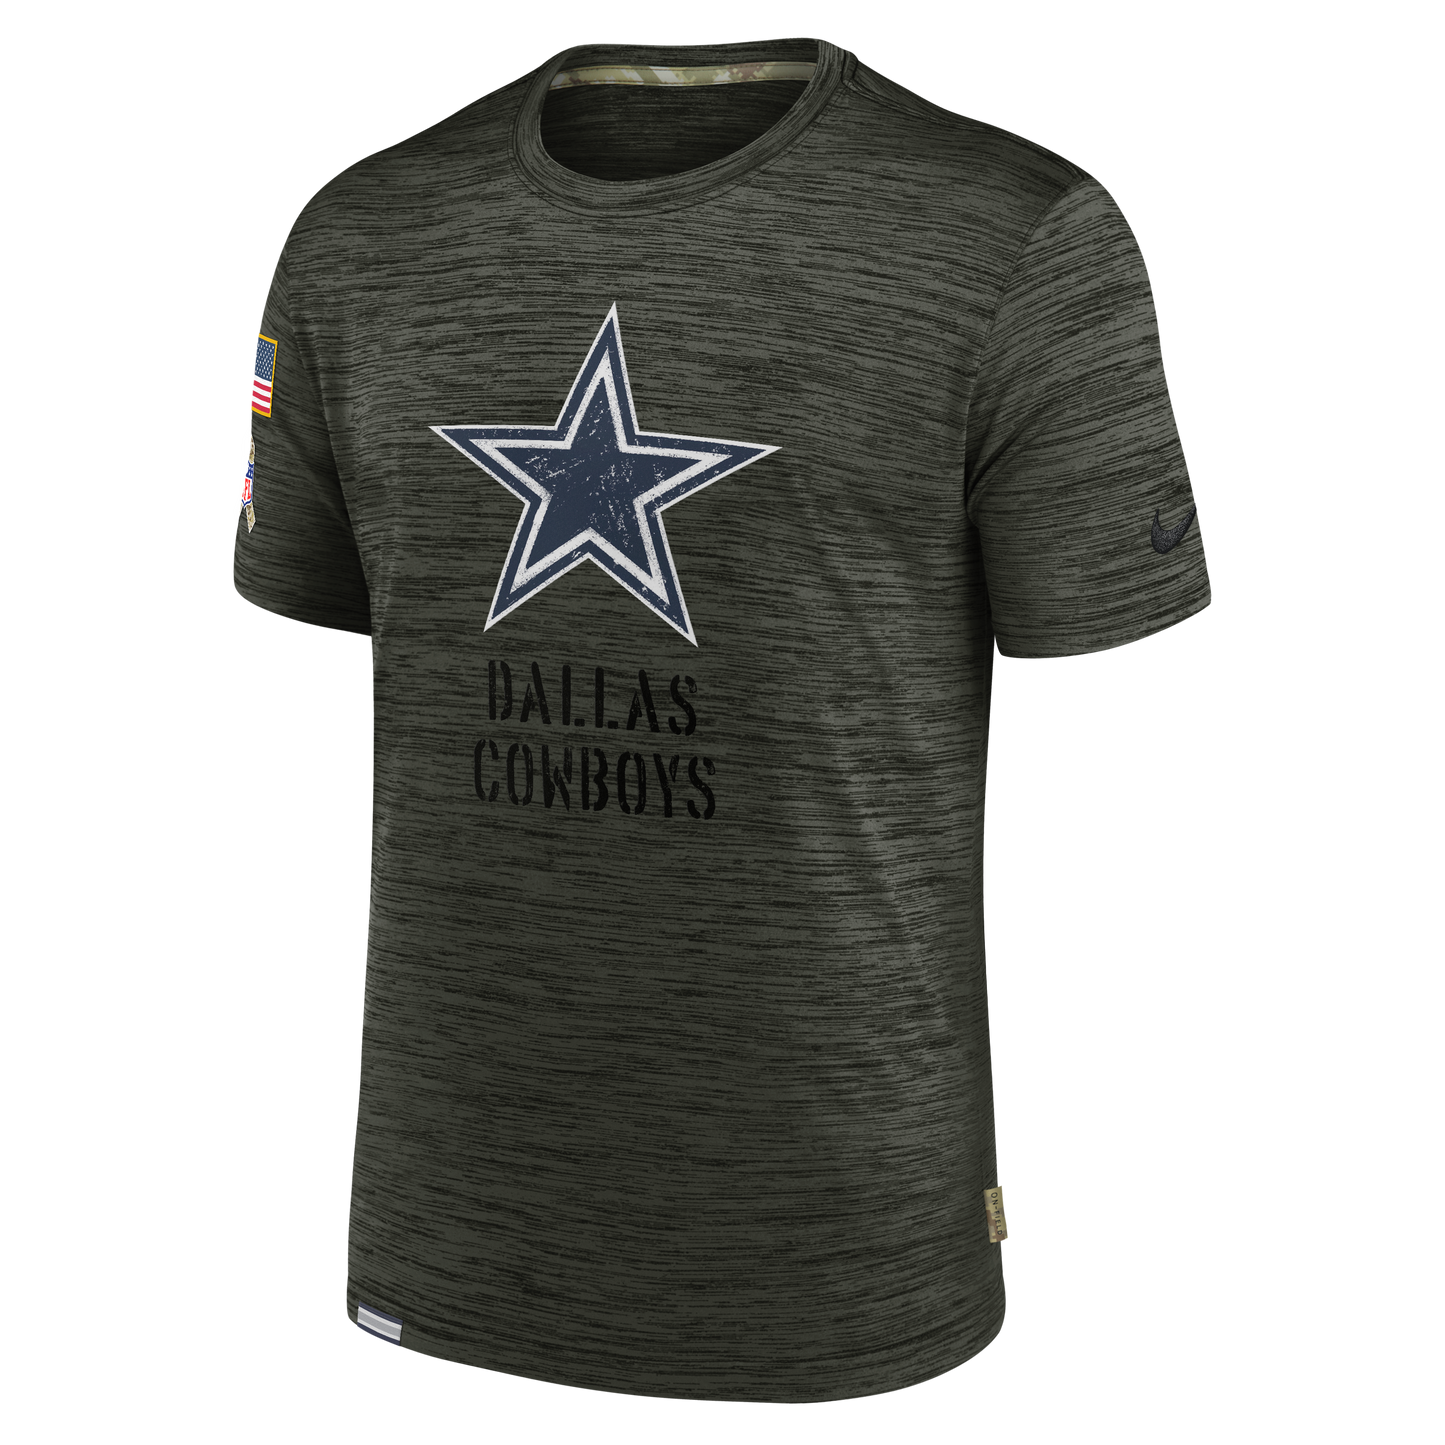 Dallas Cowboys Nike Salute to Service Velocity Dr-Fit Team T-Shirt - Olive